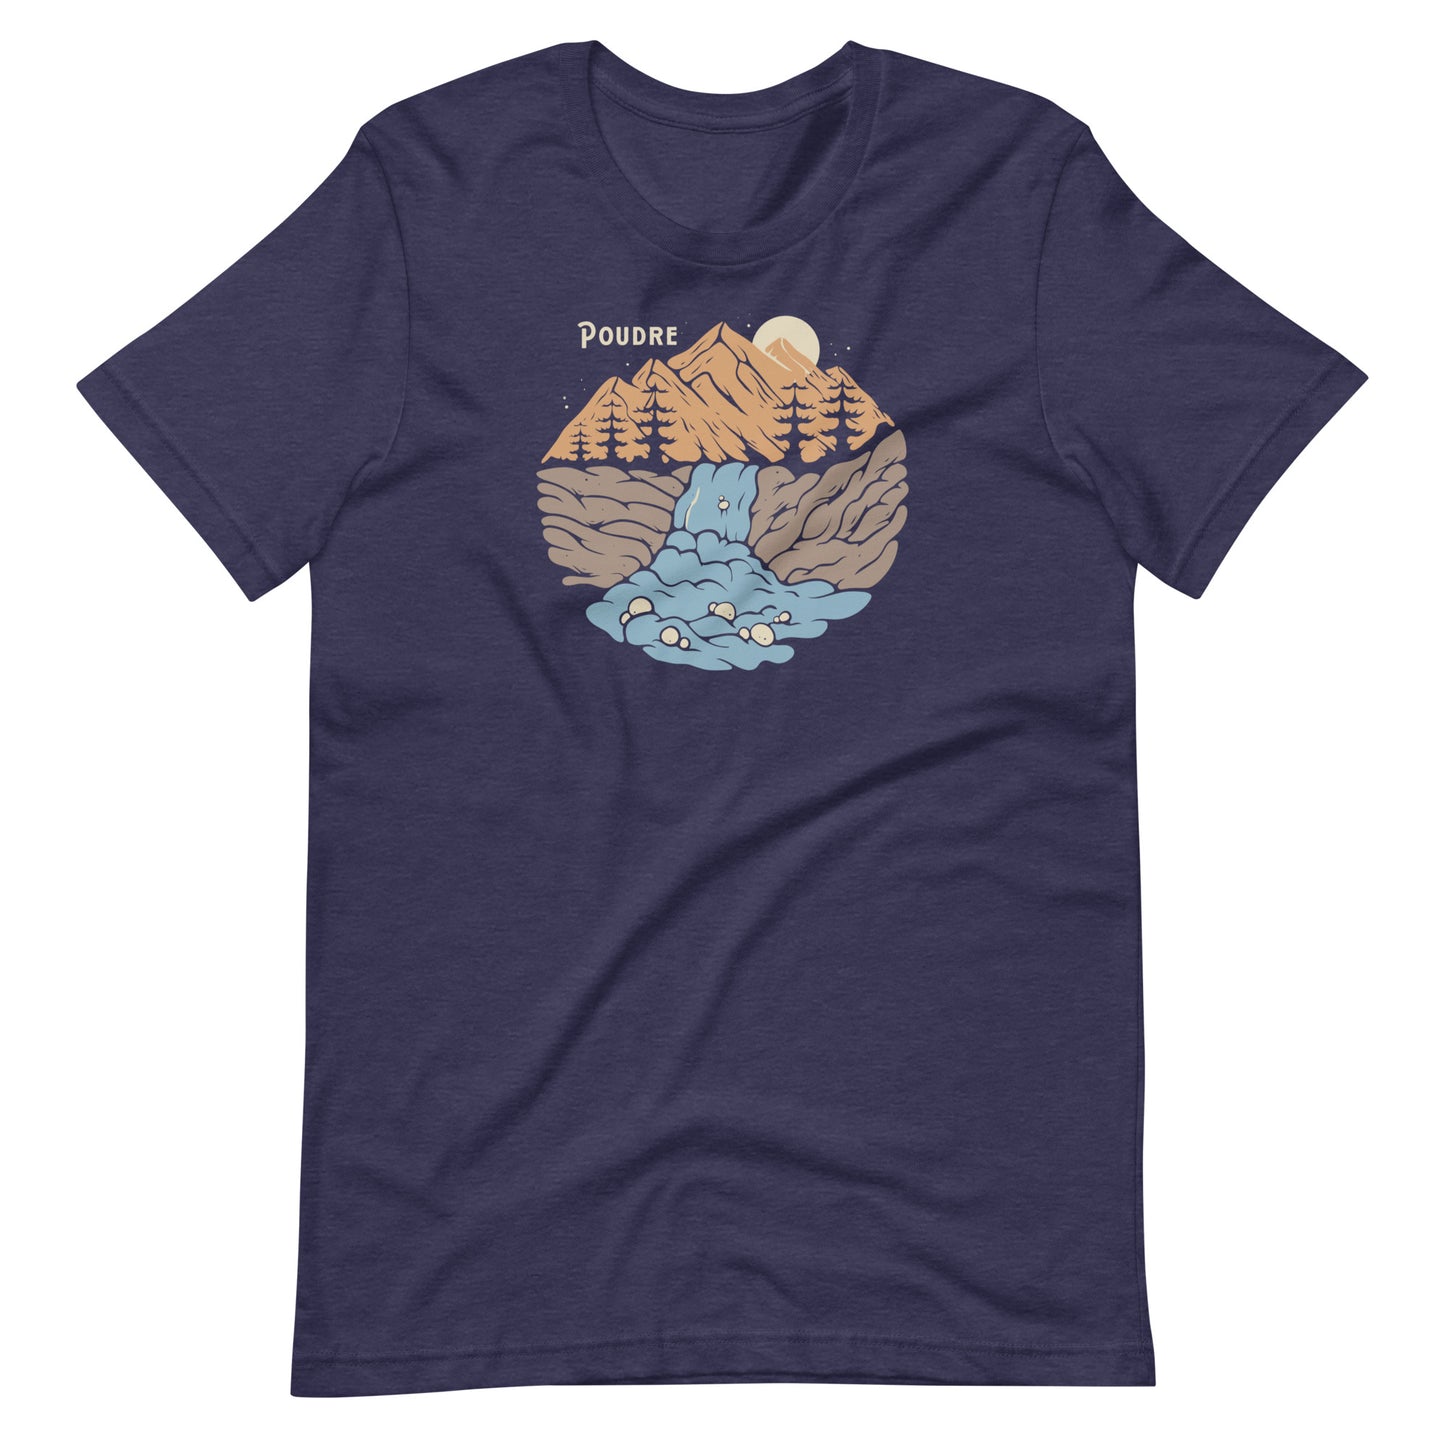 Horsetooth'd branded t-shirt, showcasing the tranquil charm of Poudre River, in a comfortable cotton-polyester blend